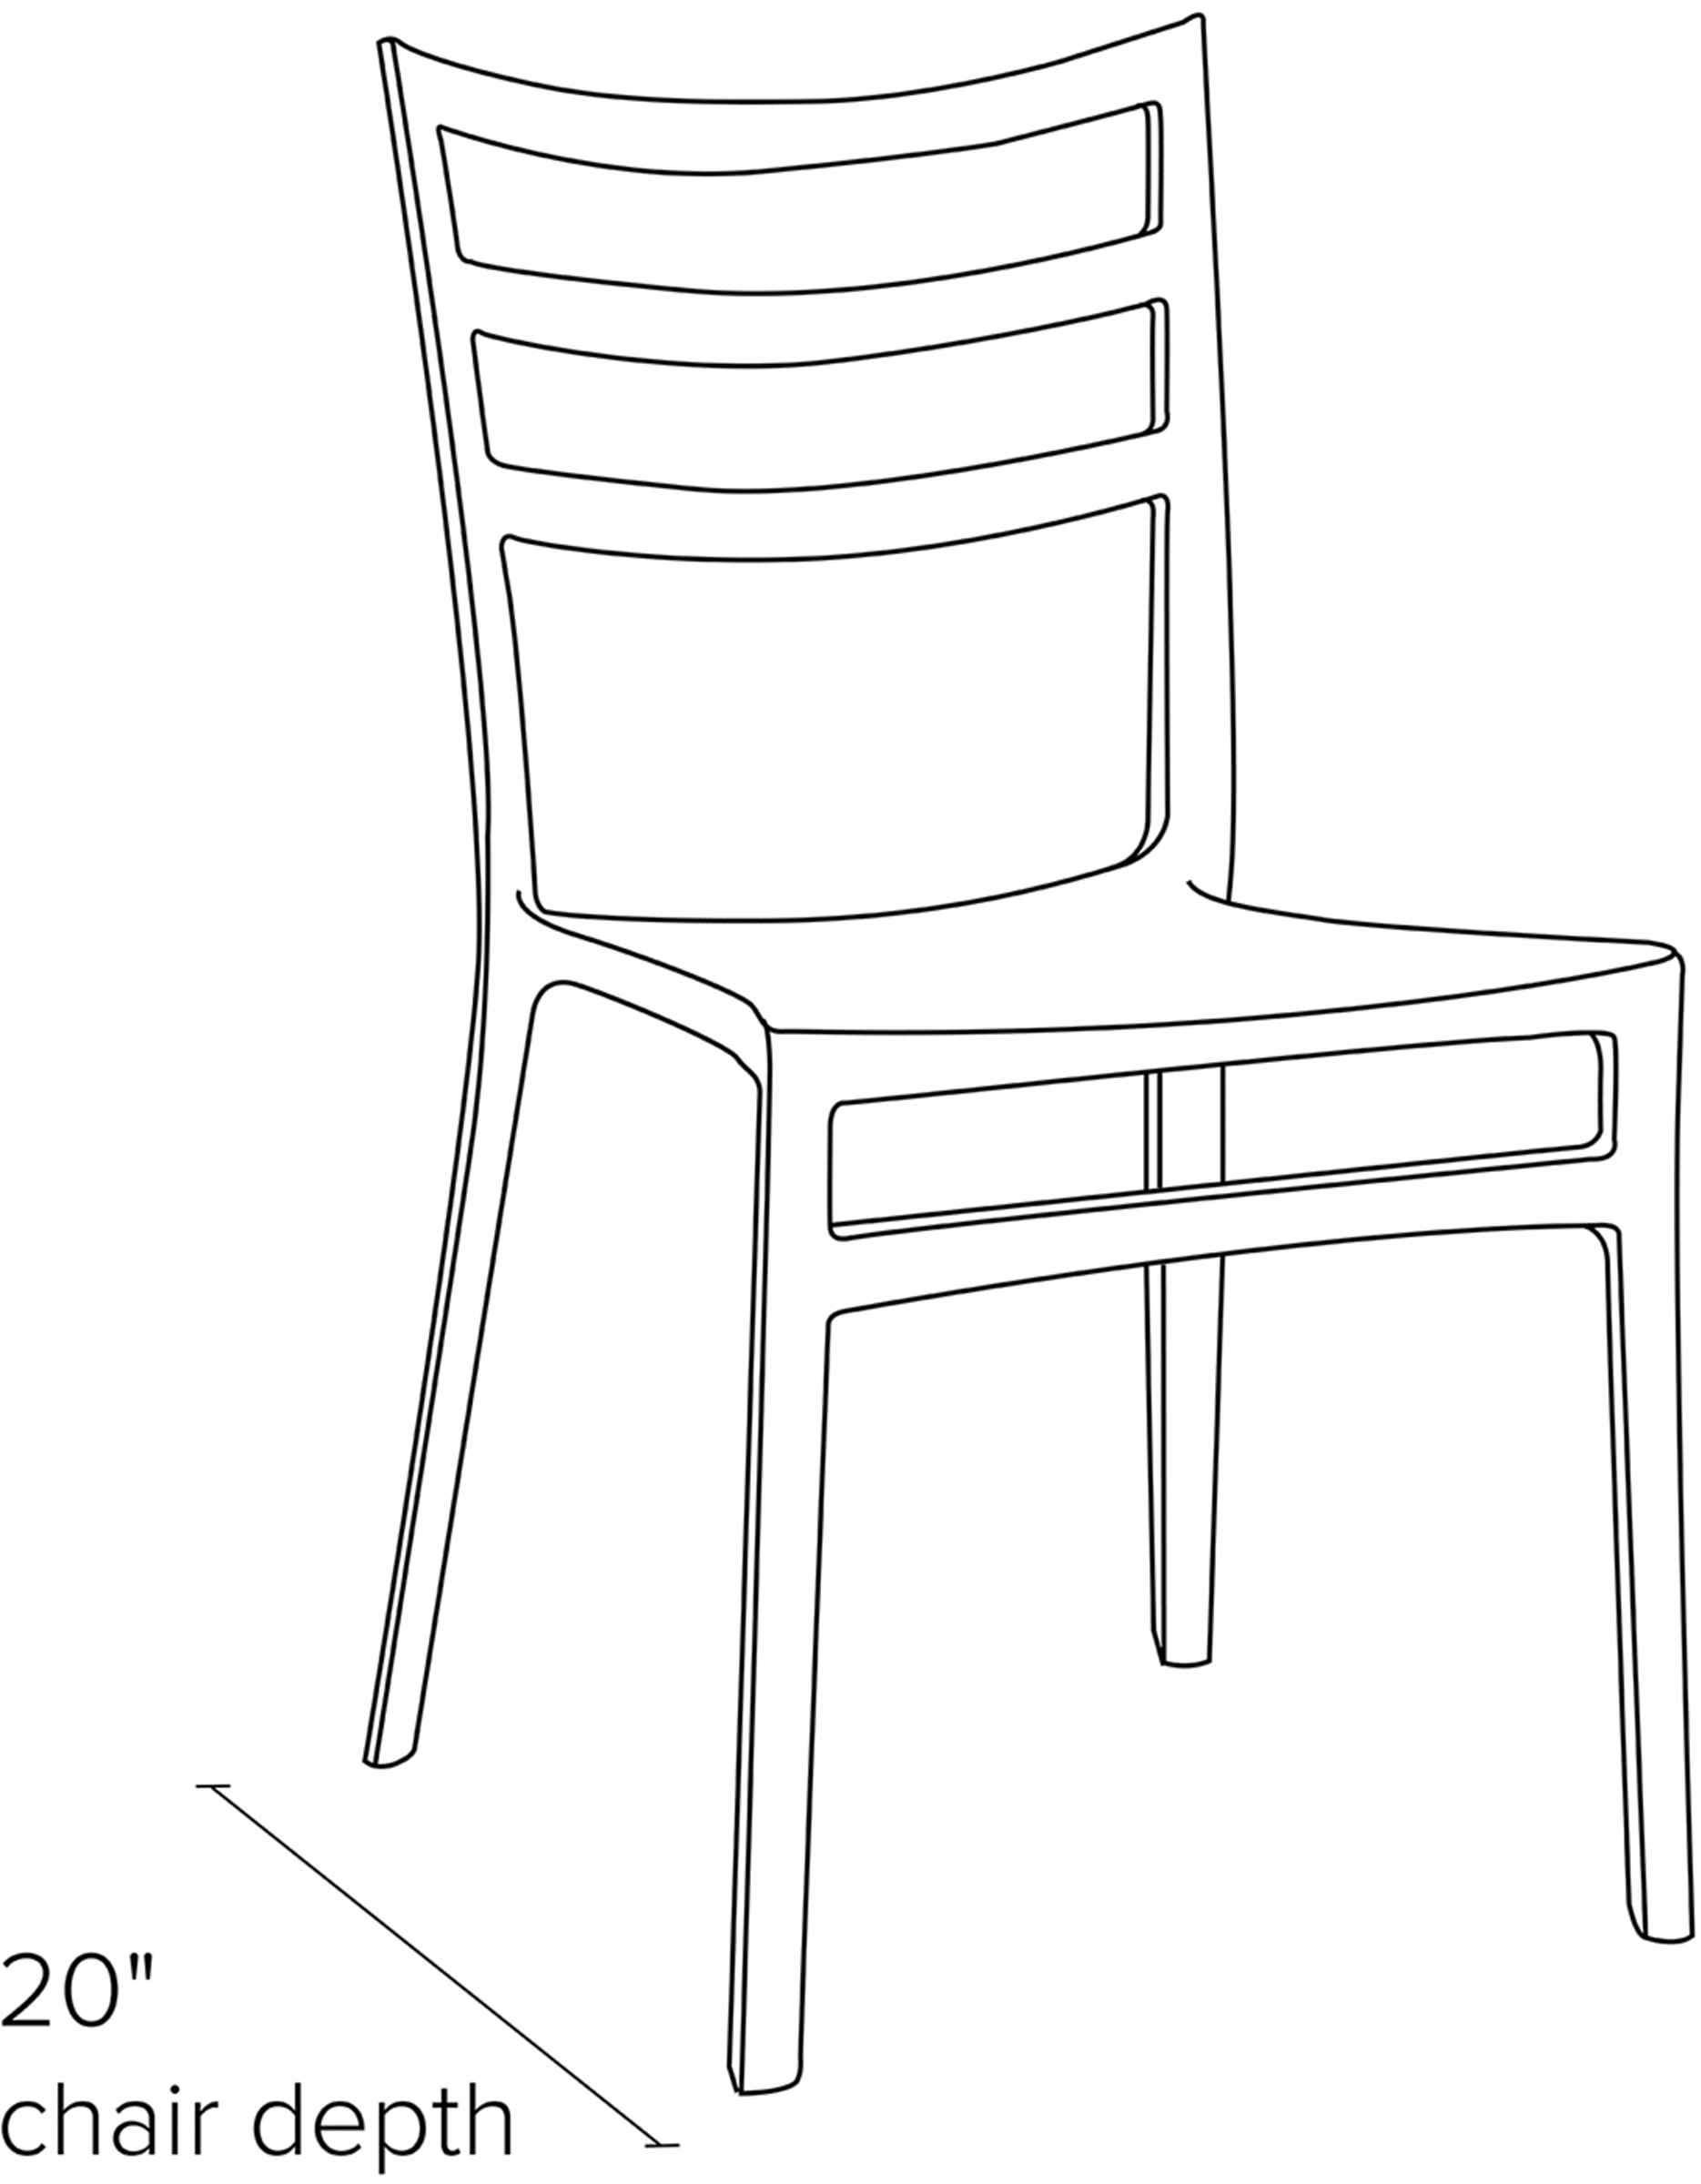 Side view dimension illustration of Sabrina side chair.